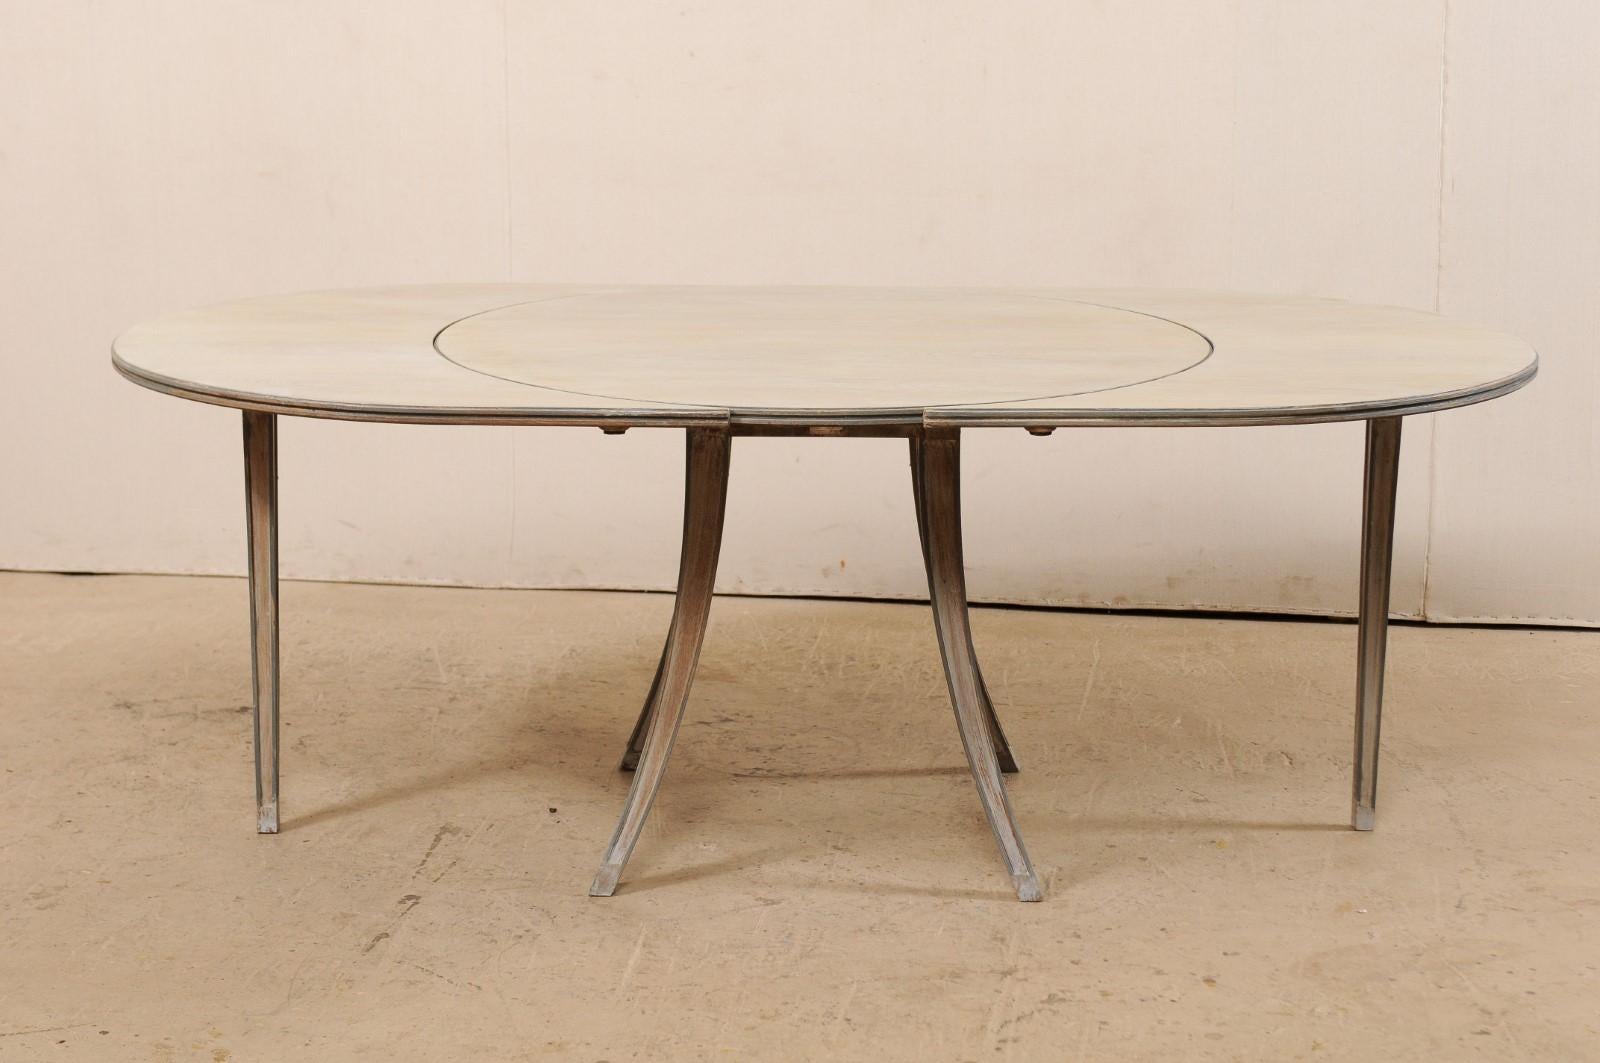 A French Mid-Century Modern oval-shaped painted-wood table with side leaves. This unique table from France features an overall oval-shape with side leaves attached, which when removed, transitions this piece into a circular center table. The design